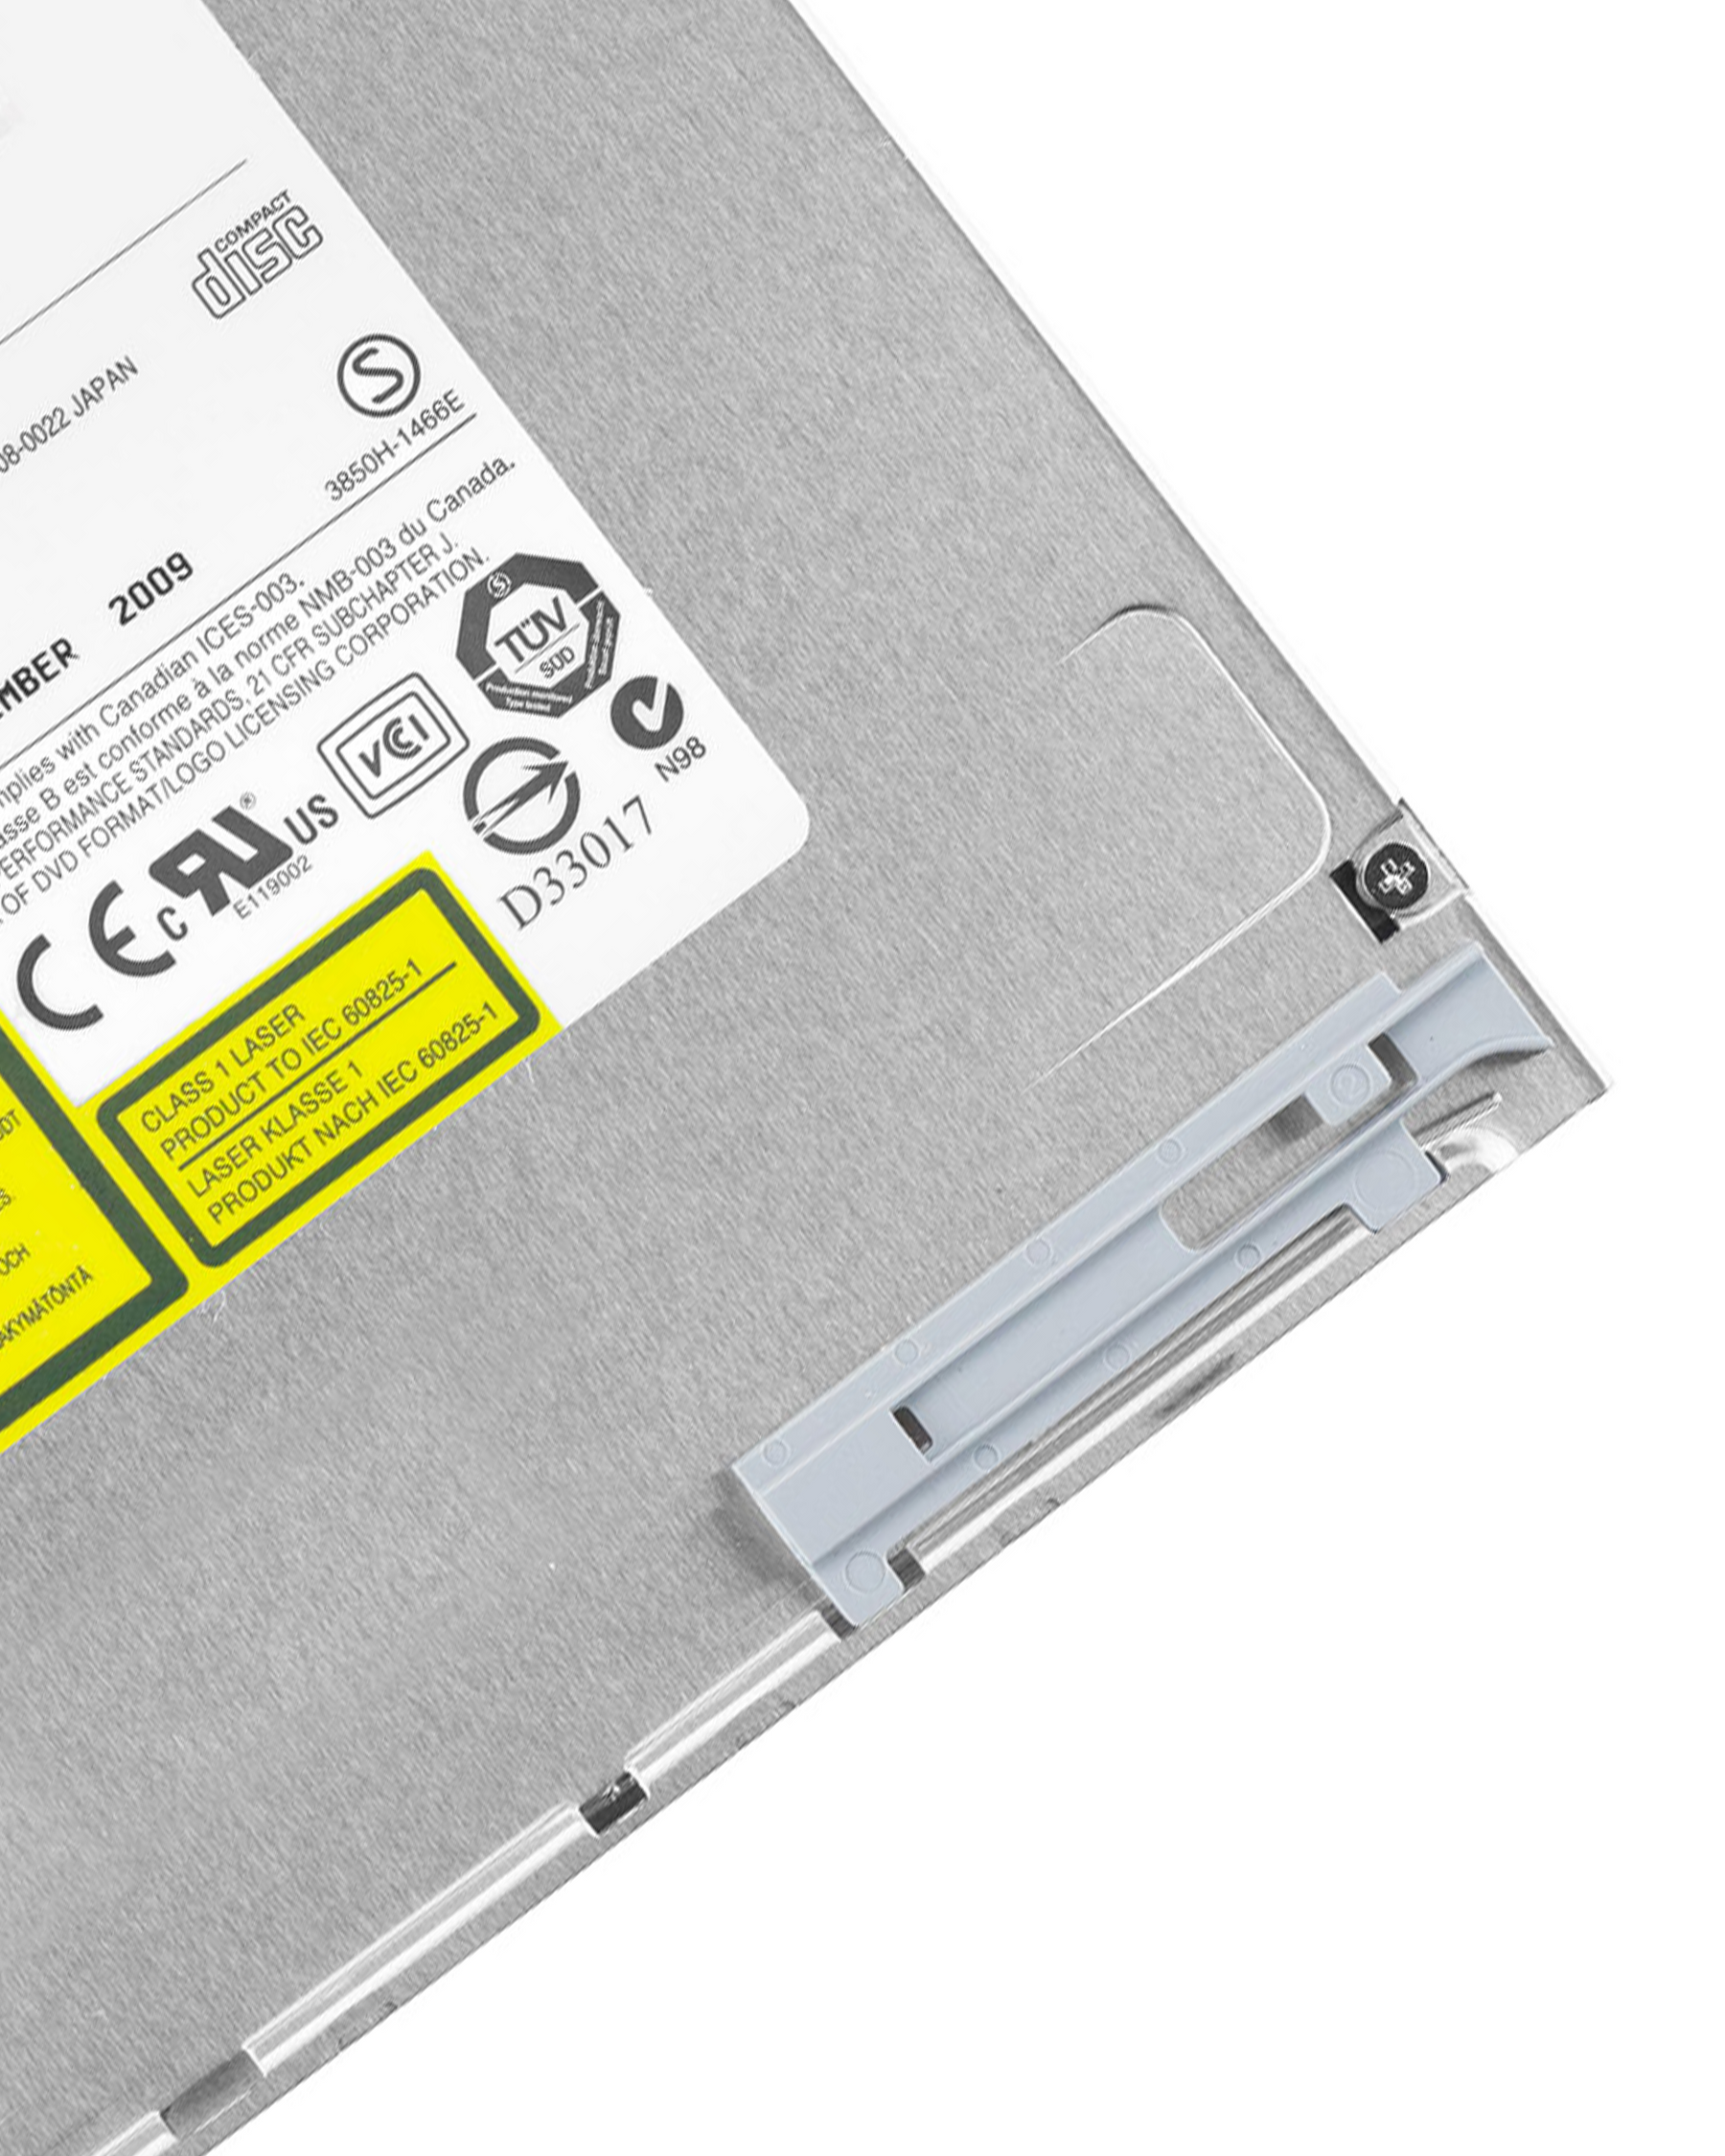 SUPERDRIVE (GS22N) COMPATIBLE FOR MACBOOK 13" A1181 (EARLY 2009 - MID 2009)